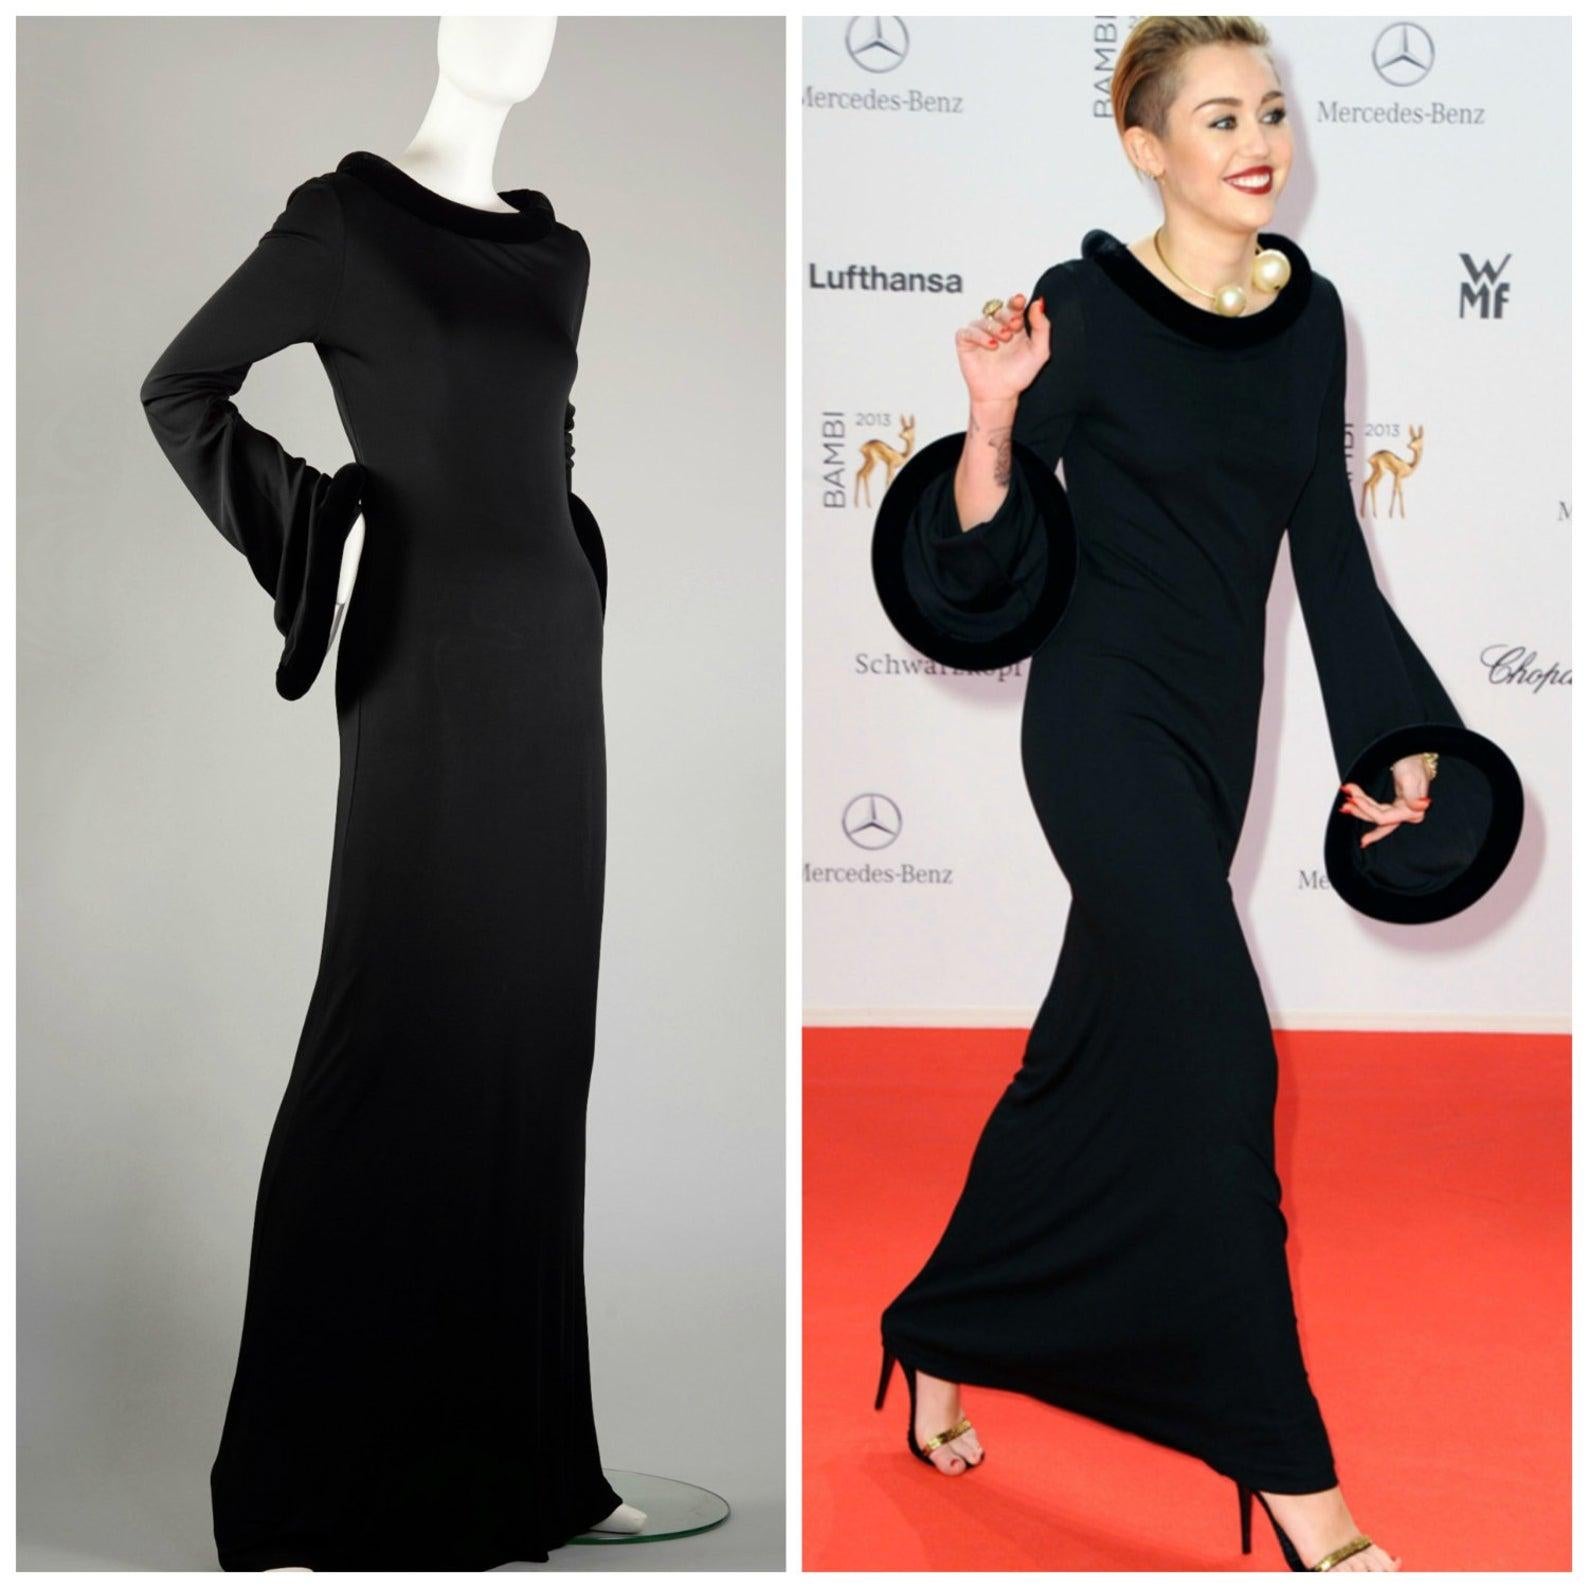 As seen on Miley Cyrus in the 2013 Bambi Awards red carpet in Berlin.

Features:
- 100% Authentic JEAN PAUL GAULTIER.
- Black long dress/ evening gown.
- Rolled velvet wide hoops detailing on the collar and cuffs.
- Label has been removed for